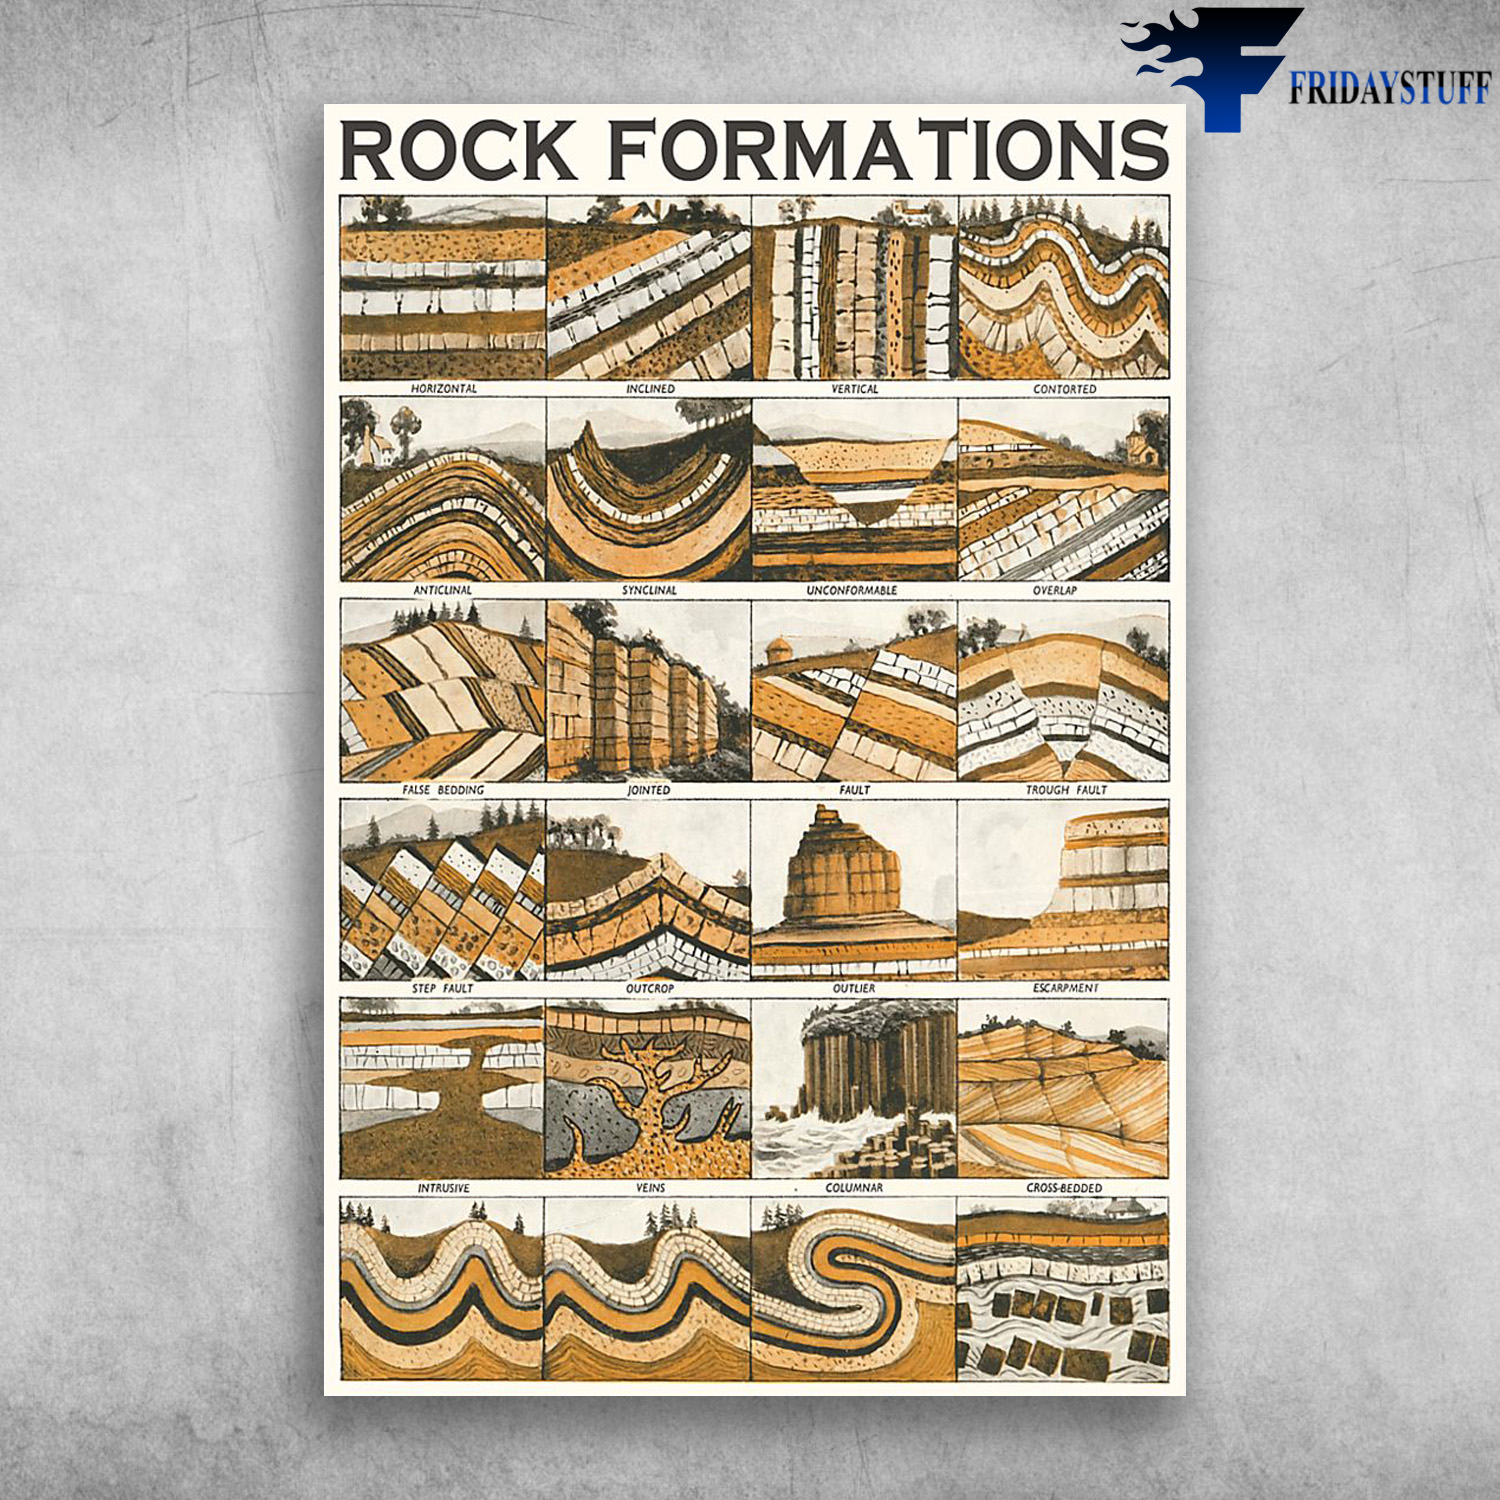 Rock Formations - Horizontal, Incliend, Vertical, Contorted, Anticunal, Synclinal, Unconformable, Overlap,Faise Bedding, Jointed, Fault, Trough Fault